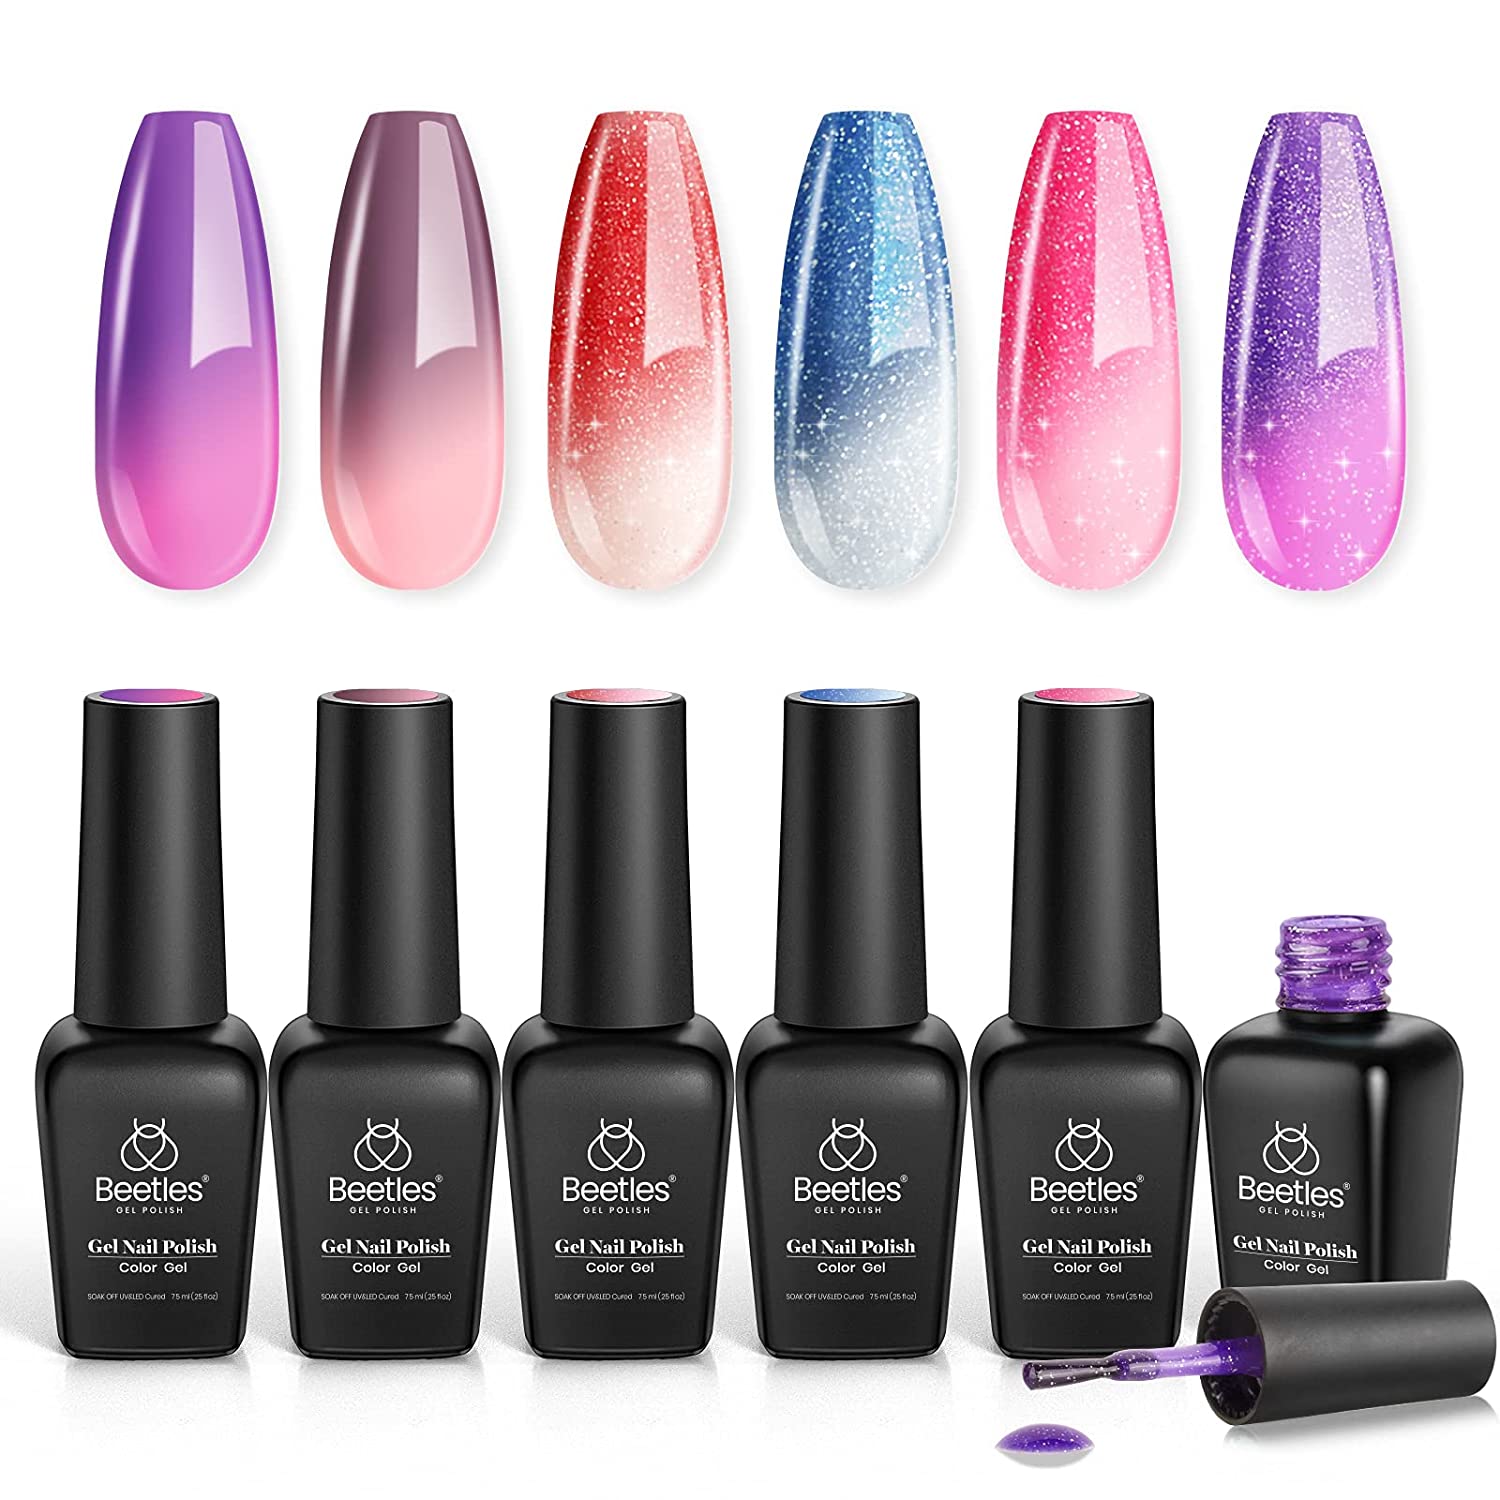 Honest Forwarder | Beetles Gel Polish Nail Polish Gel, 6 Gel Nail Polish  7.5 ml Nail Design Sets, UV/LED Lamp Dry, Gel for Nail Design Manicure,  changing. ‎colour